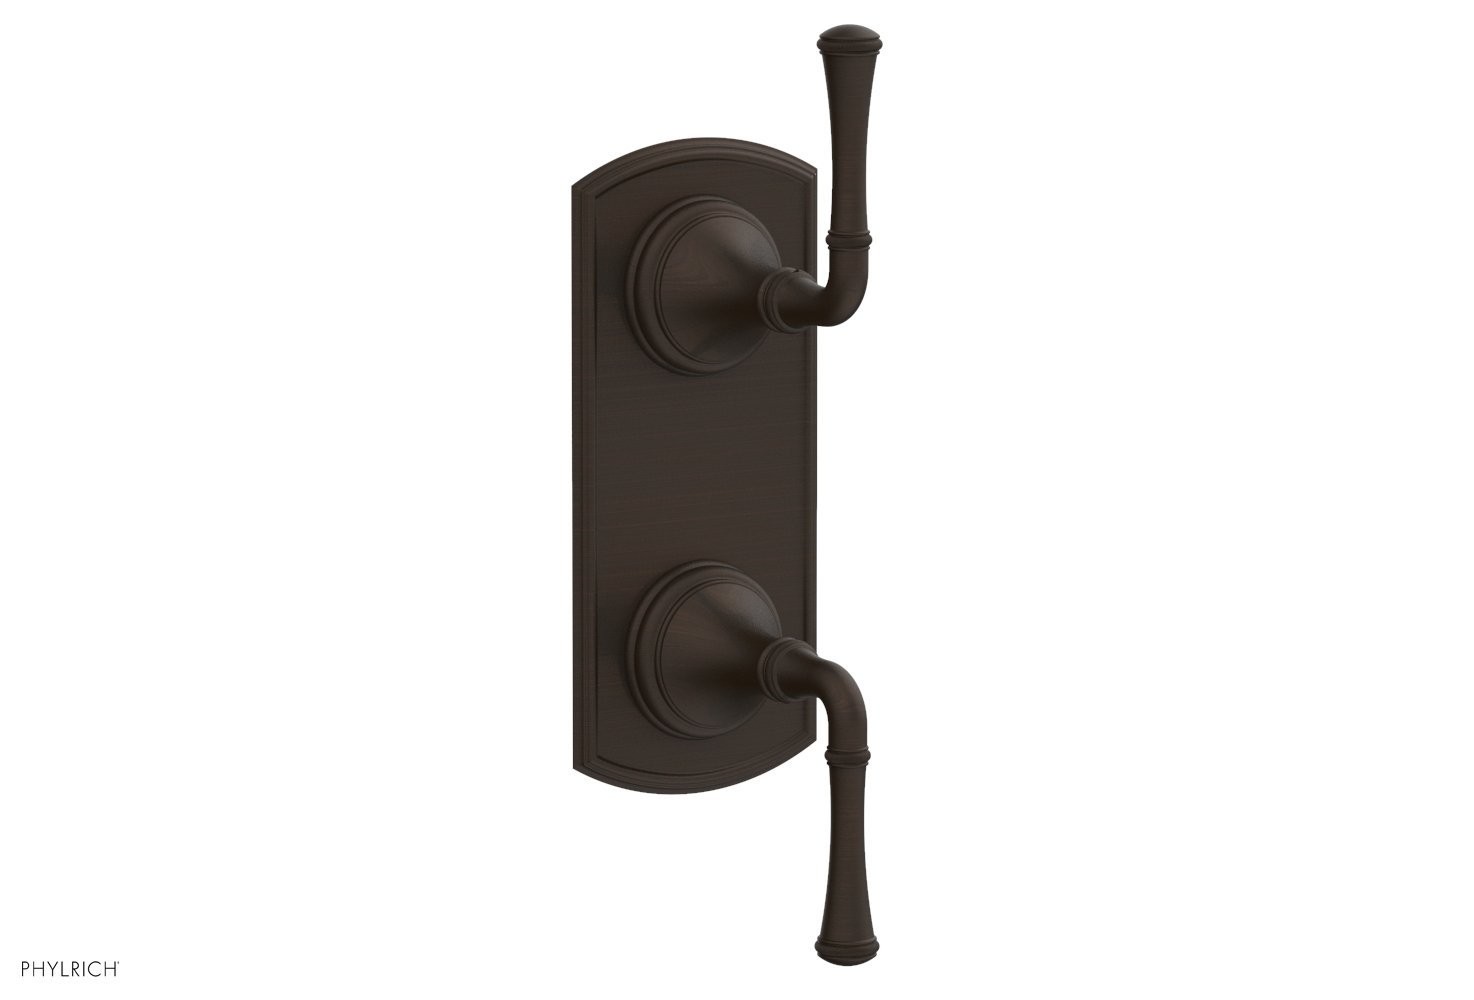 PHYLRICH 4-136/11B COINED WALL MOUNT TWO LEVER HANDLES MINI THERMOSTATIC VALVE WITH VOLUME CONTROL OR DIVERTER TRIM